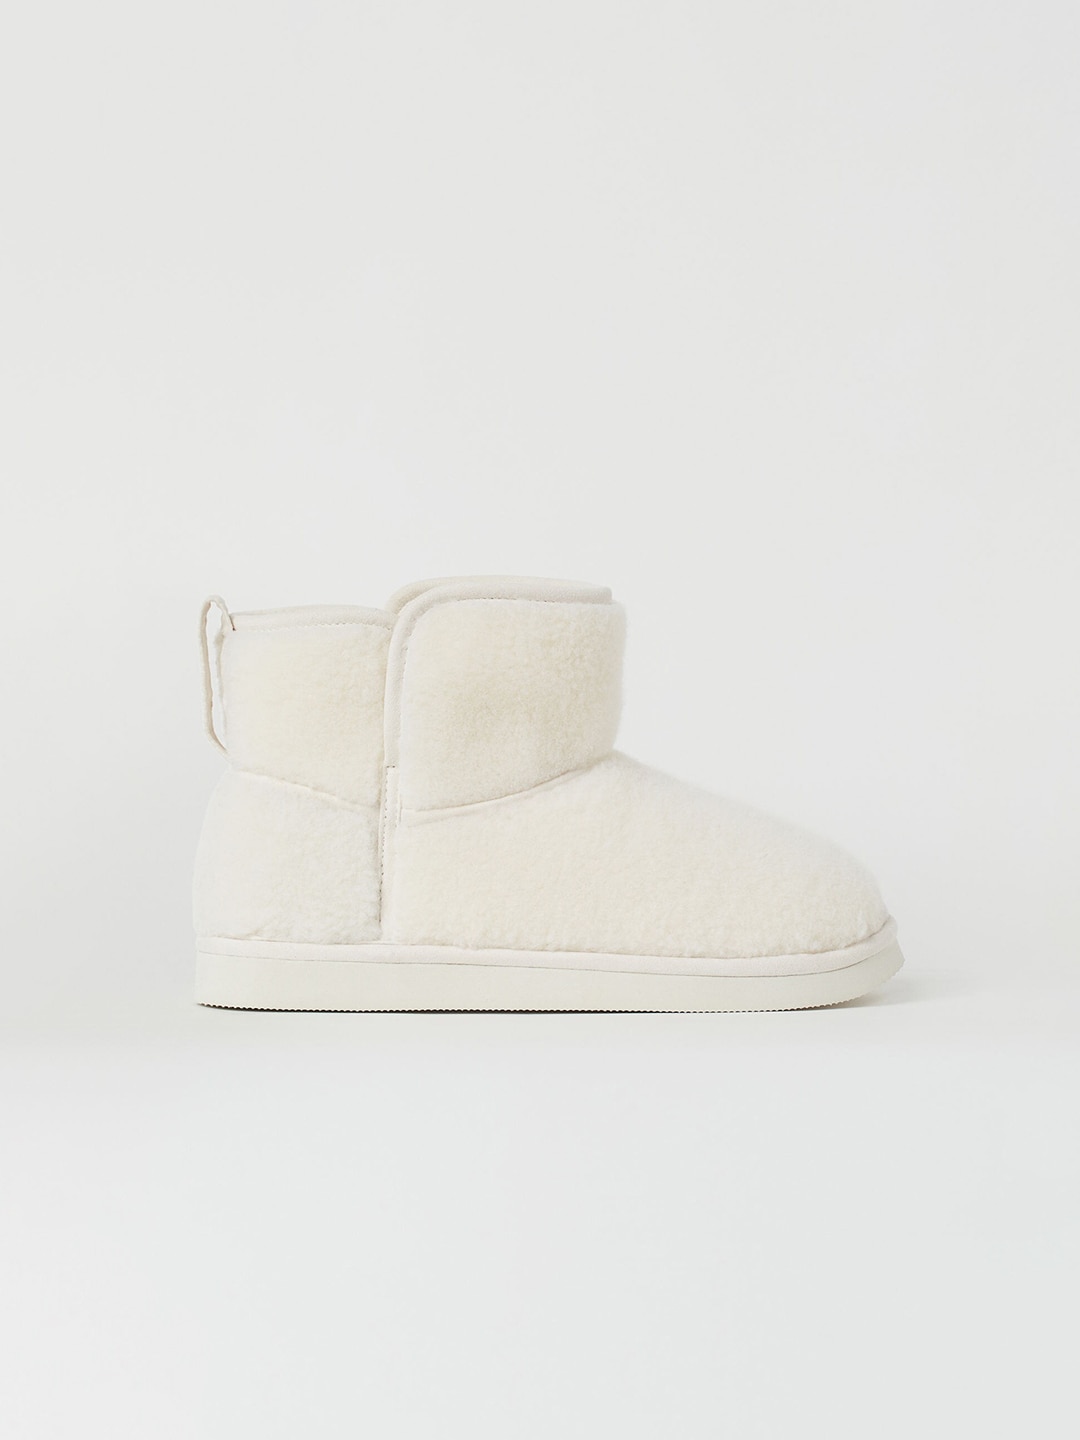 H&M Women White Warm-Lined Boots Price in India